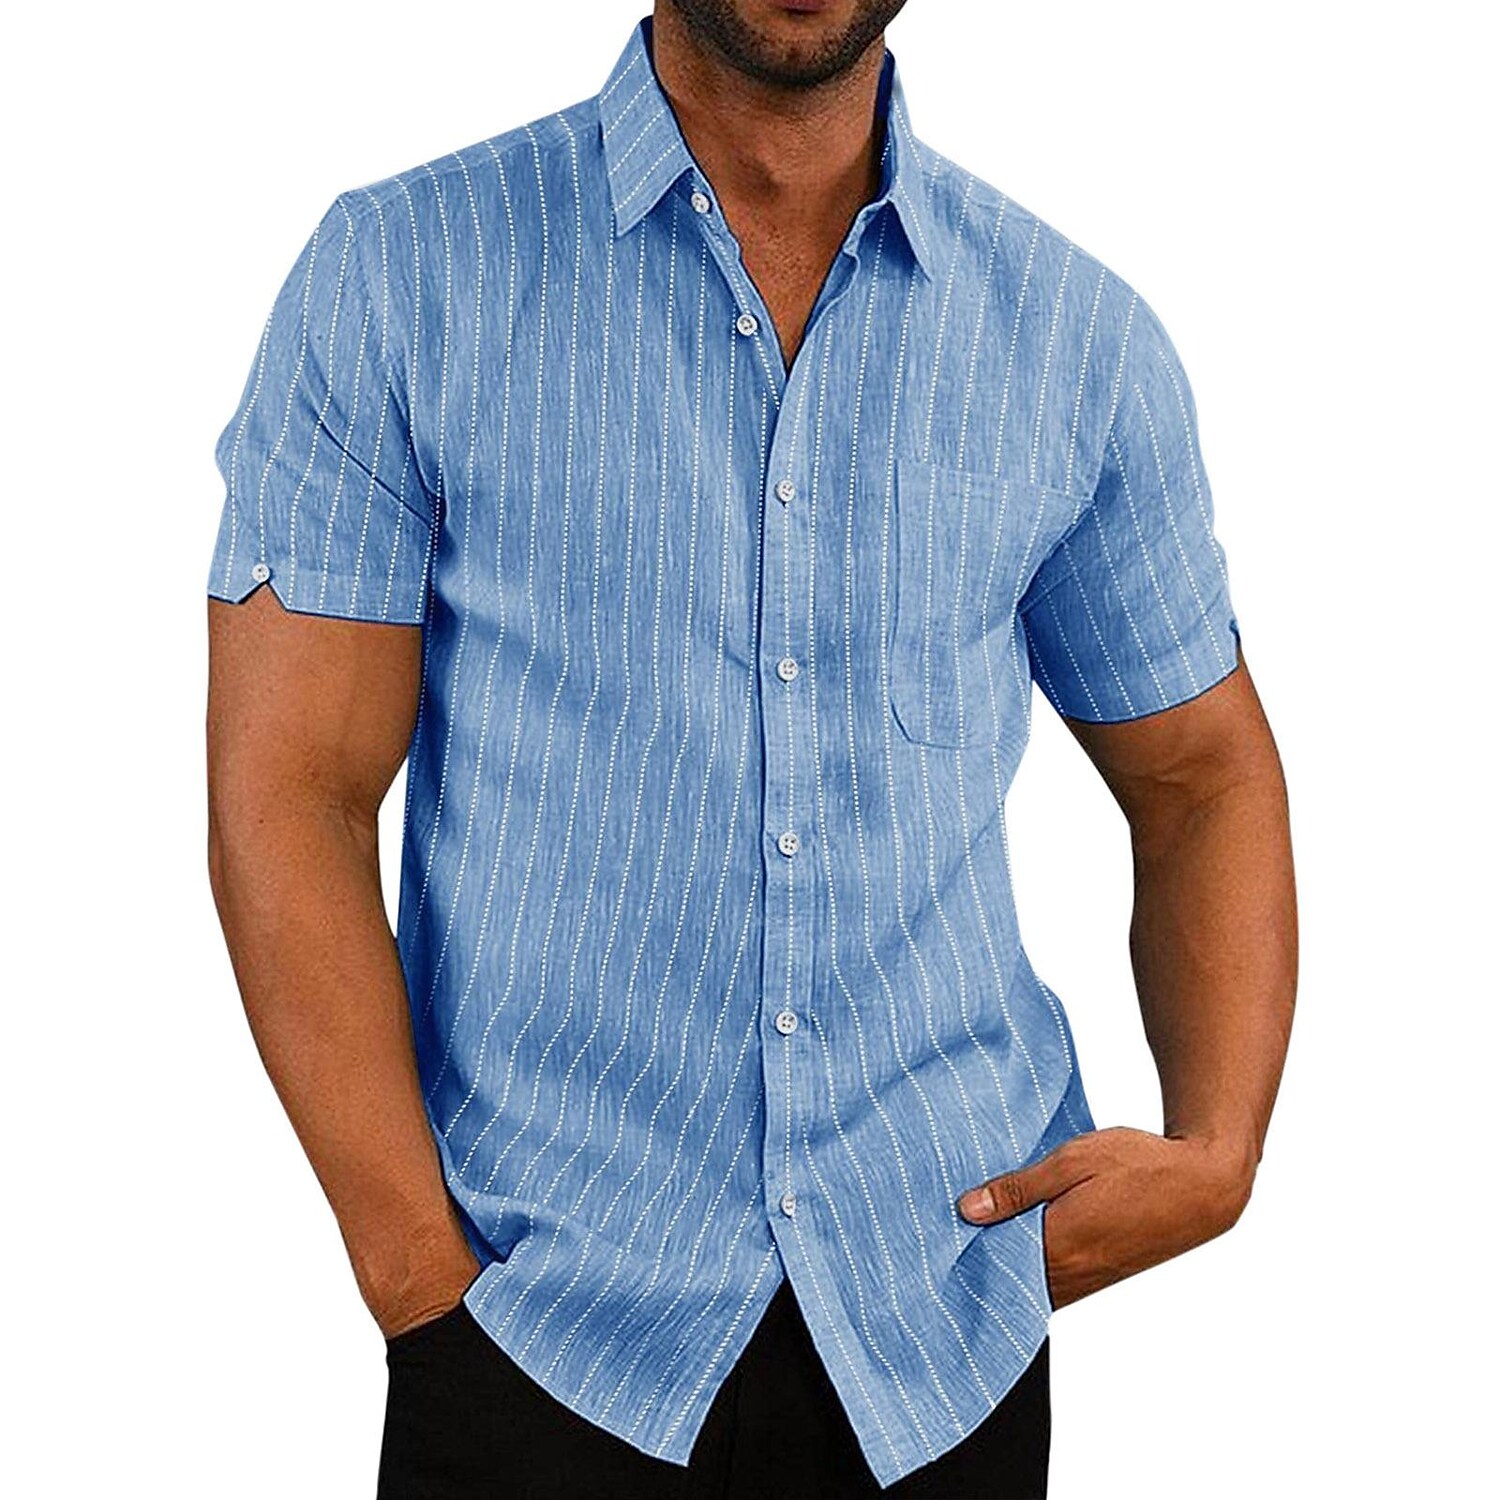 Men's Striped Short-sleeved Casual Shirts-poisonstreetwear.com